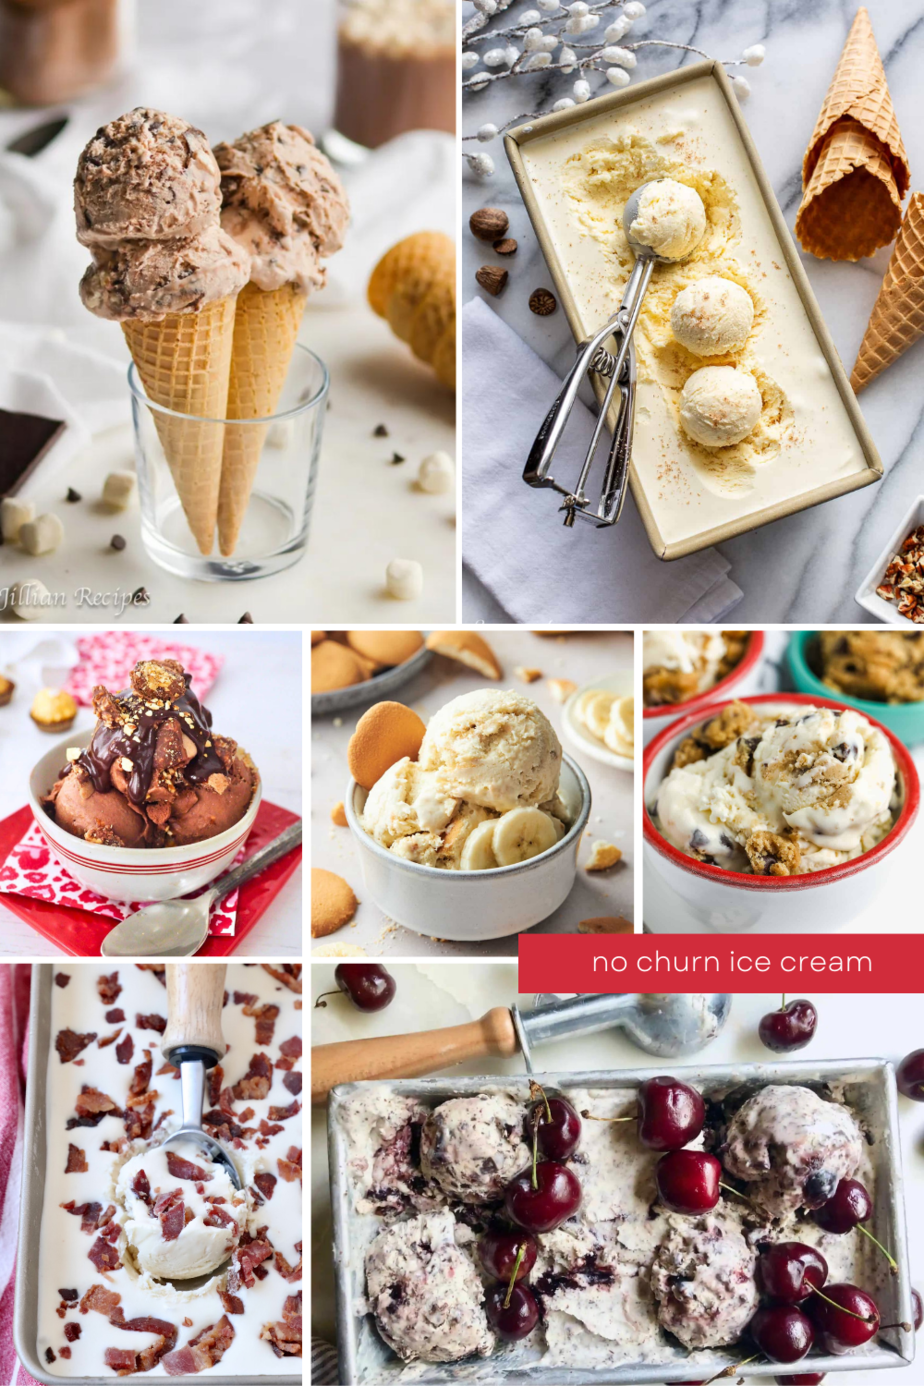 🍦✨ Scoop up some sweet summer vibes with our collection of no churn ice cream recipes! From classic flavors to creative concoctions, there's something for every frozen treat lover. No fancy equipment required – just pure, creamy deliciousness awaiting your taste buds. 